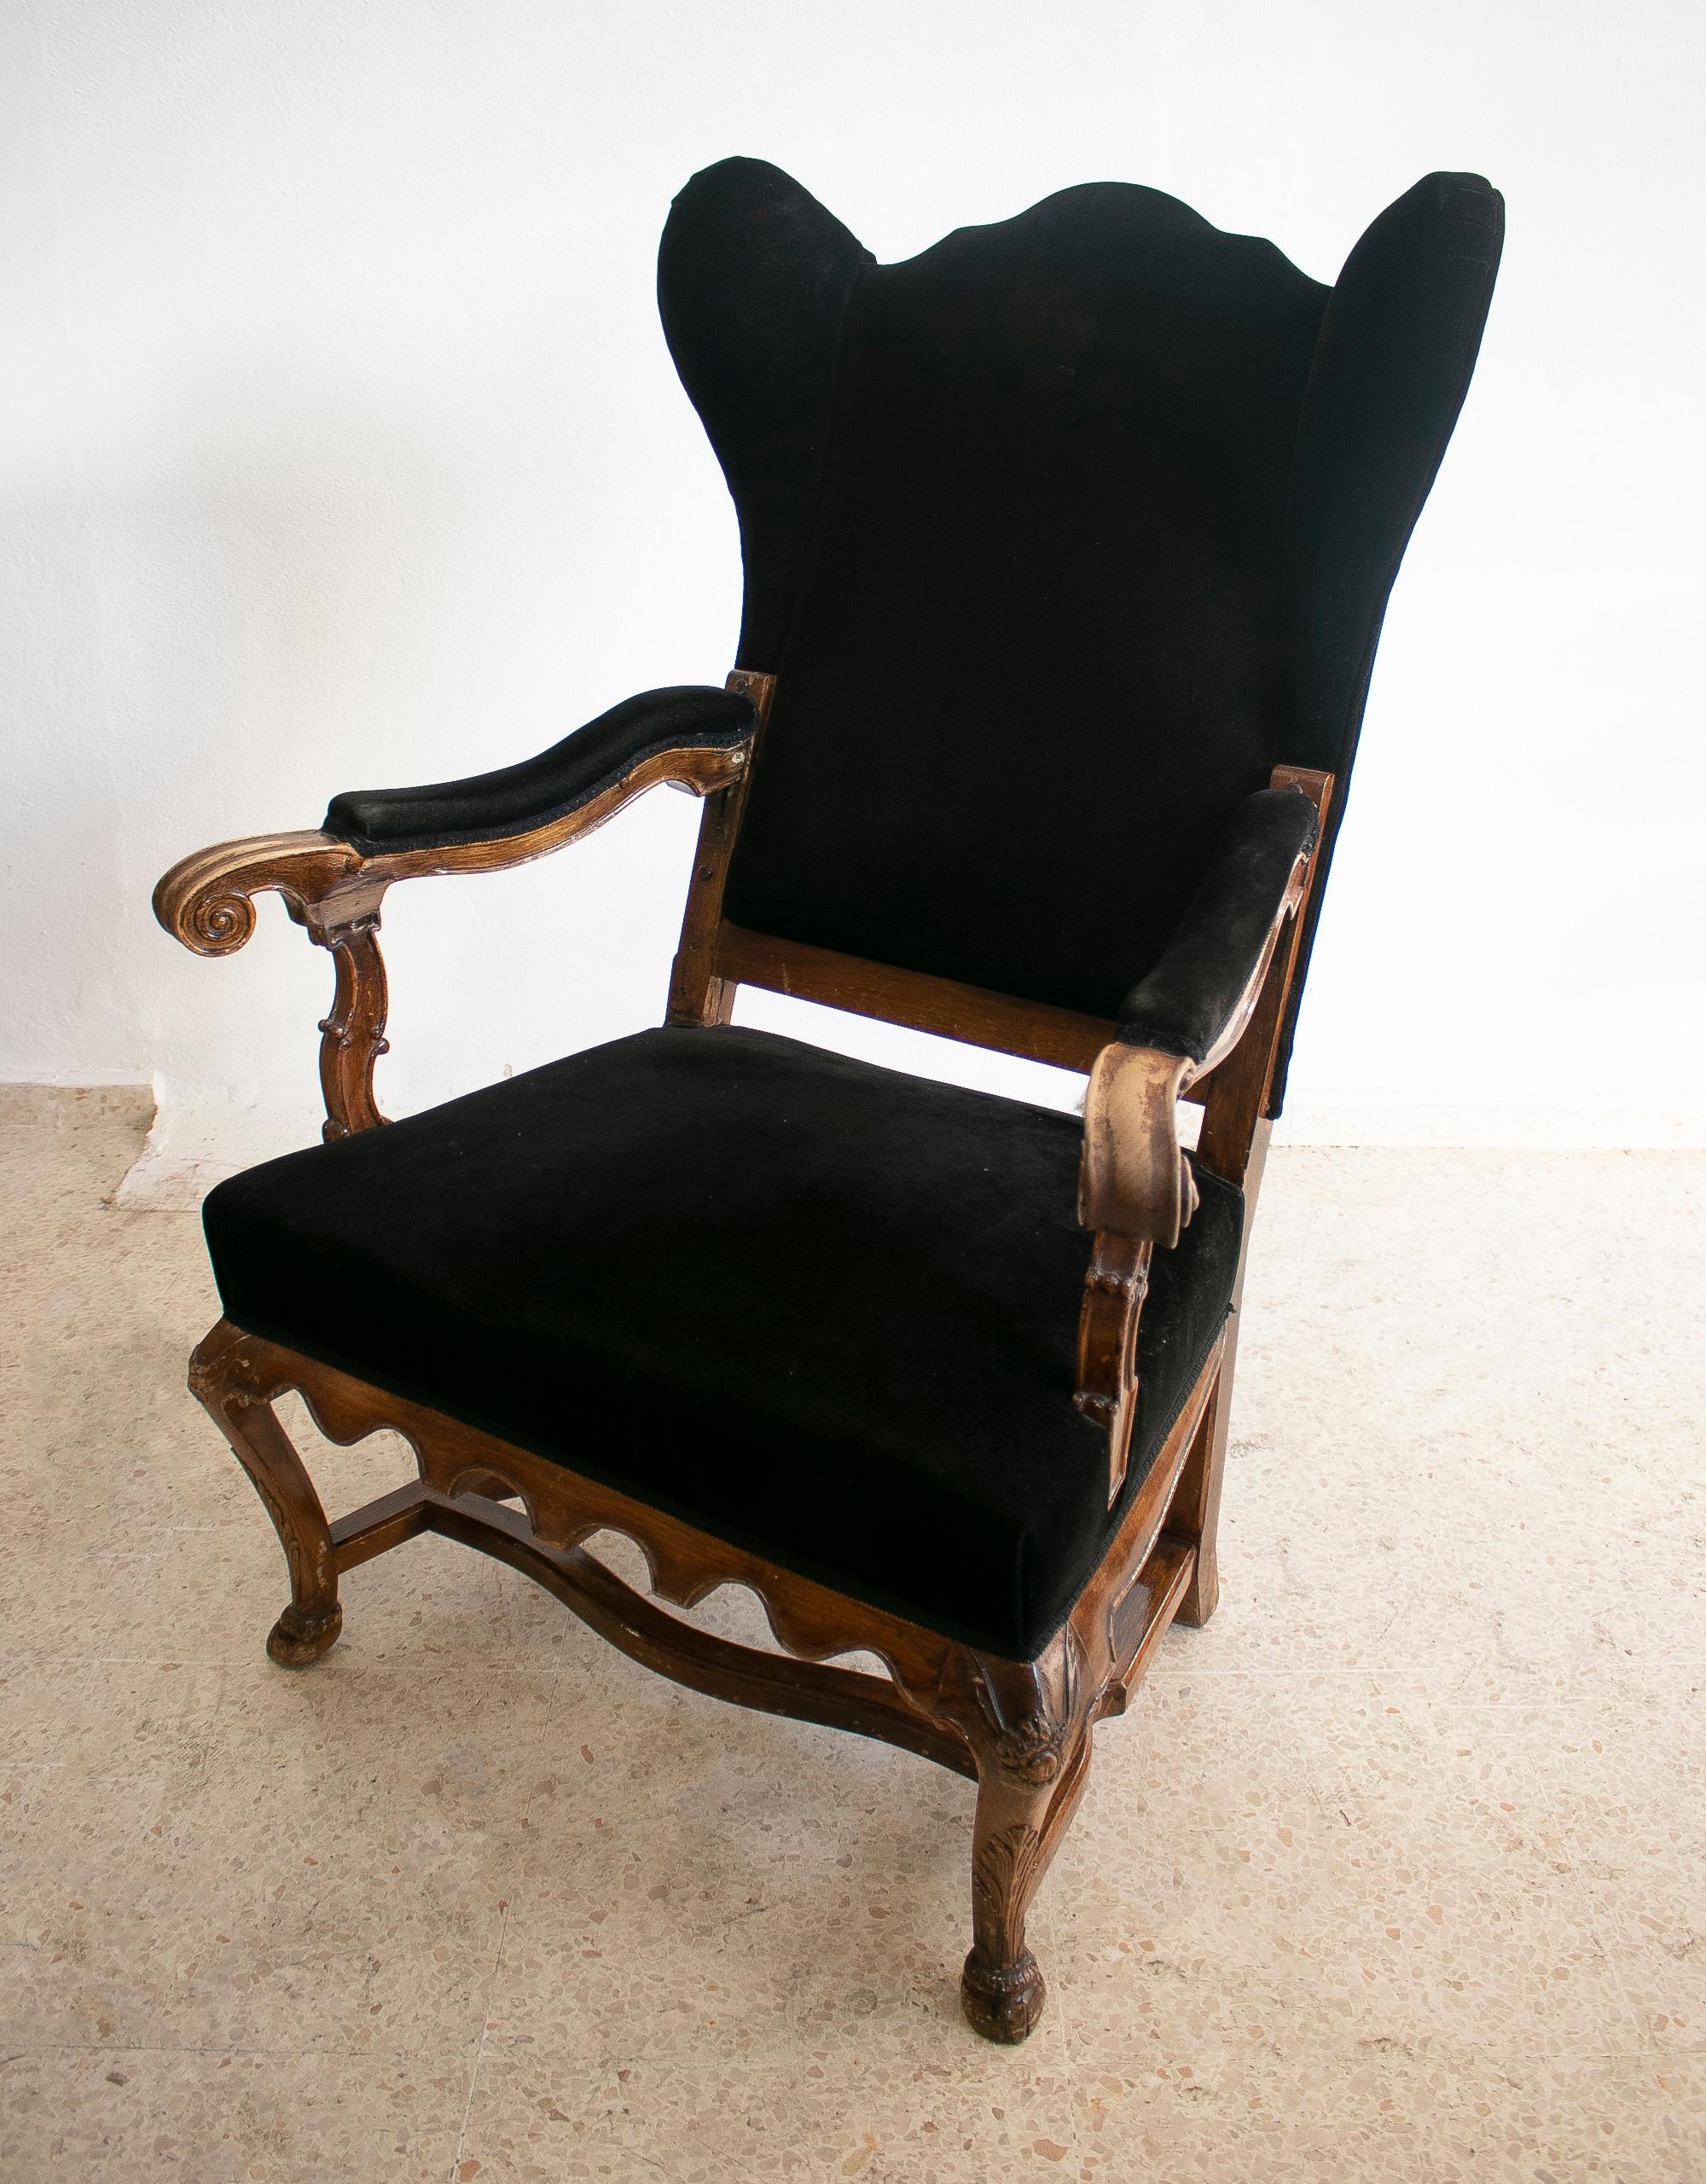 19th Century English Wooden Winged Armchair w/ Velvet Upholstery For Sale 1